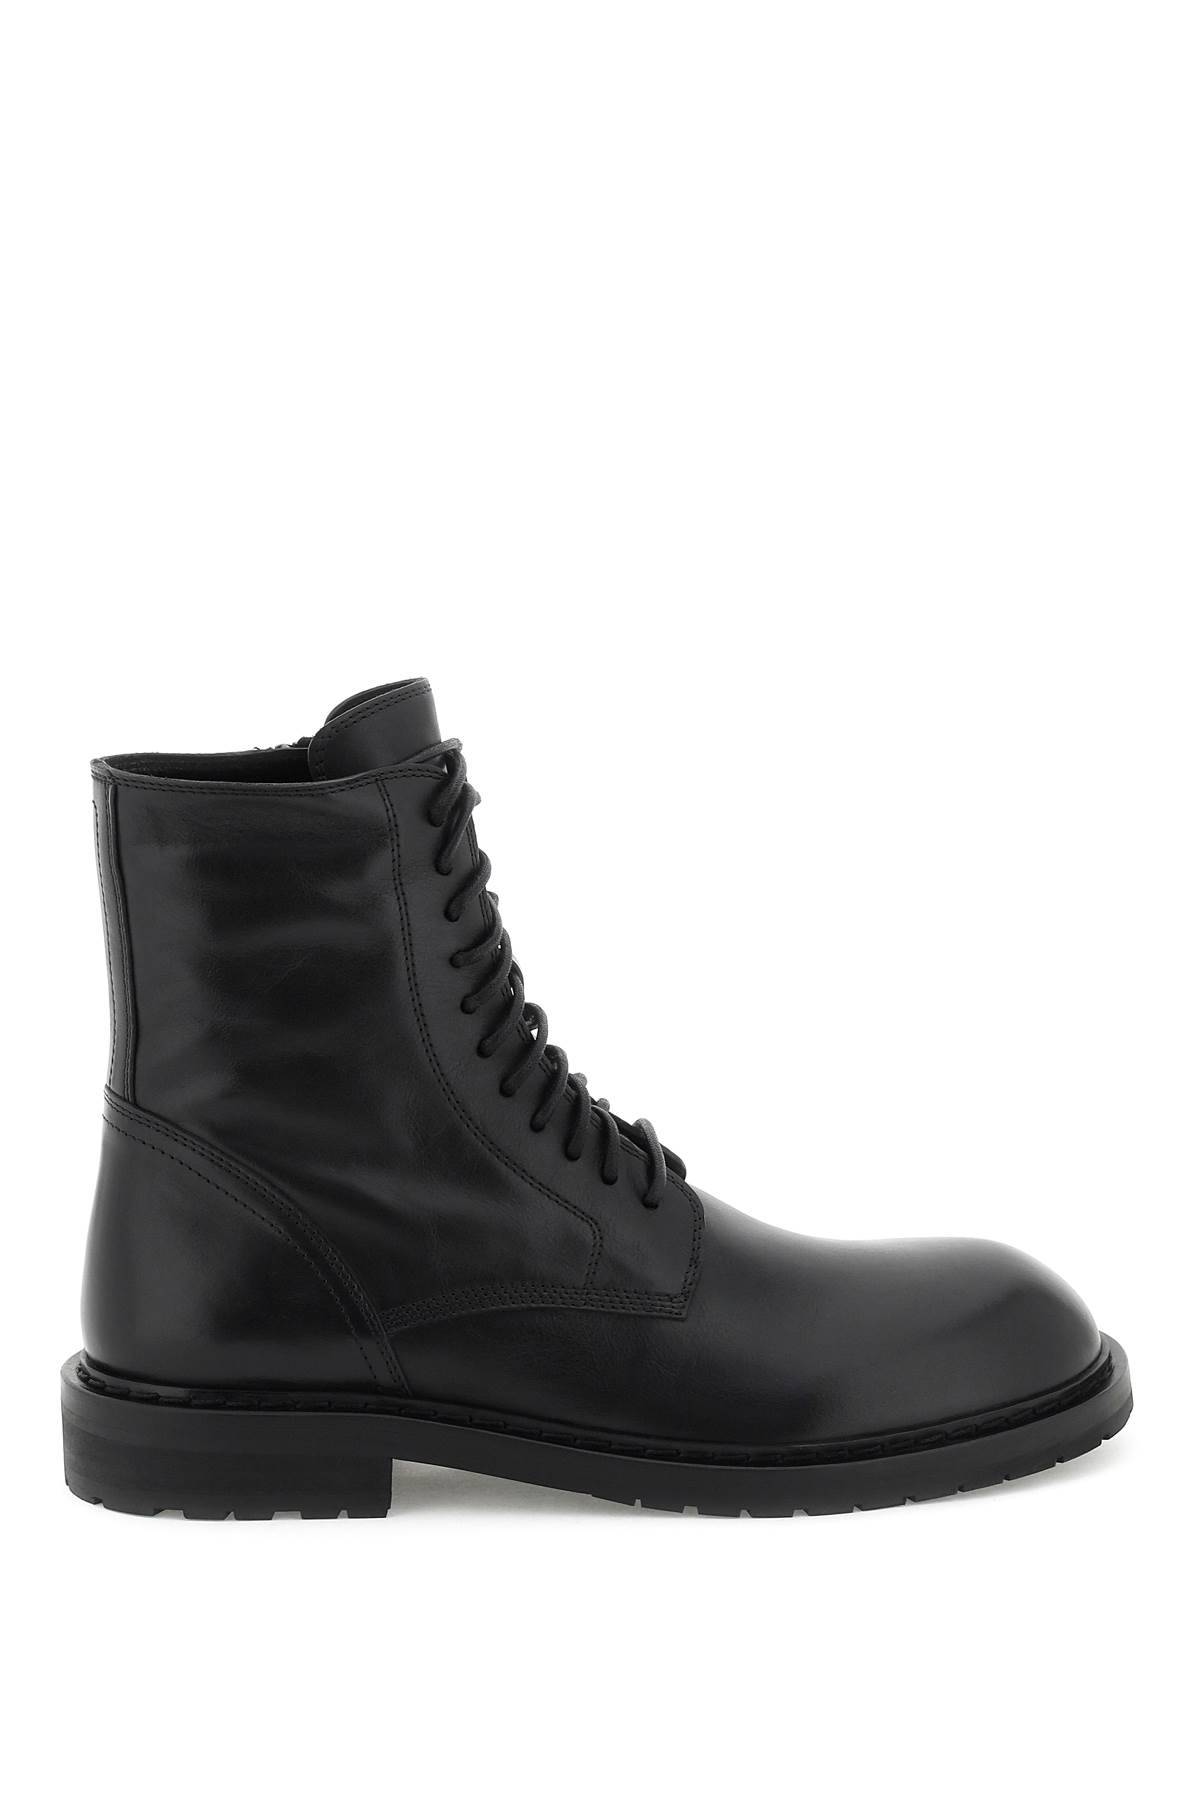 Ann Demeulemeester 'danny' Combat Boots In Black